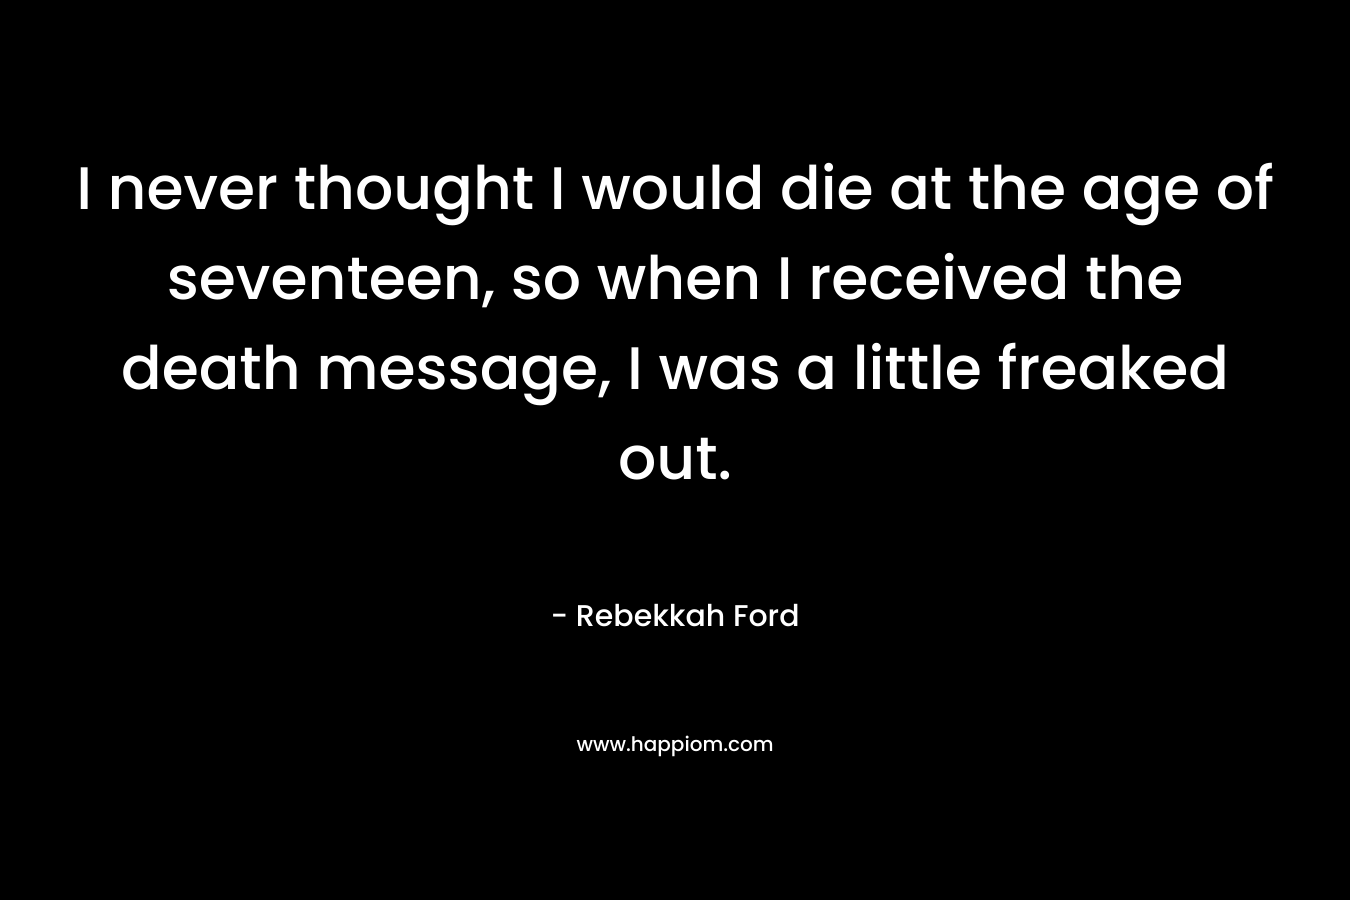 I never thought I would die at the age of seventeen, so when I received the death message, I was a little freaked out. – Rebekkah Ford